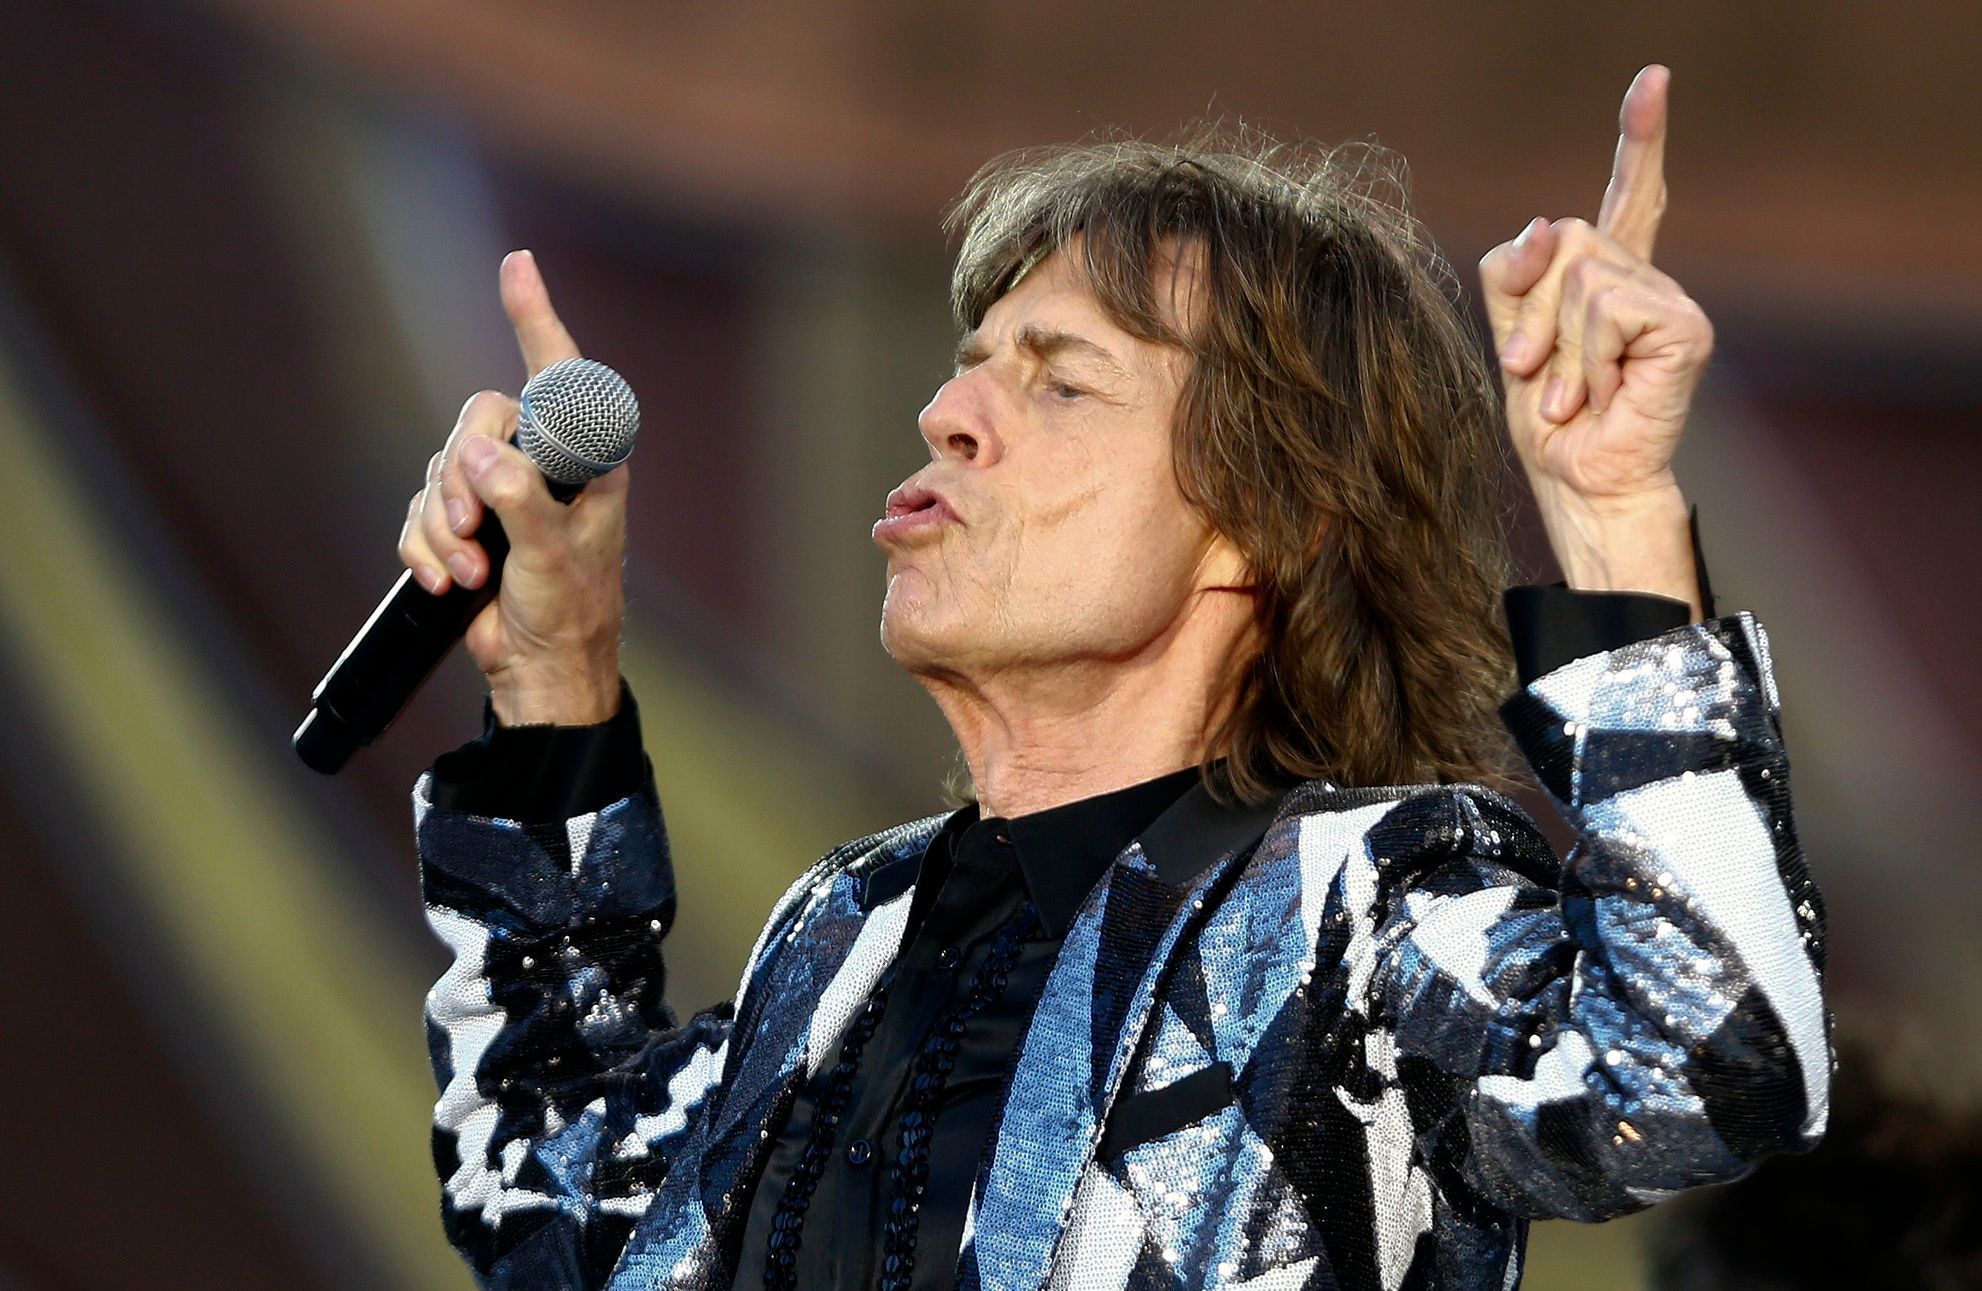 Jagger of the Rolling Stones performs during their &quot;14 on Fire&quot; concert at the Letzigrund Stadium in Zurich